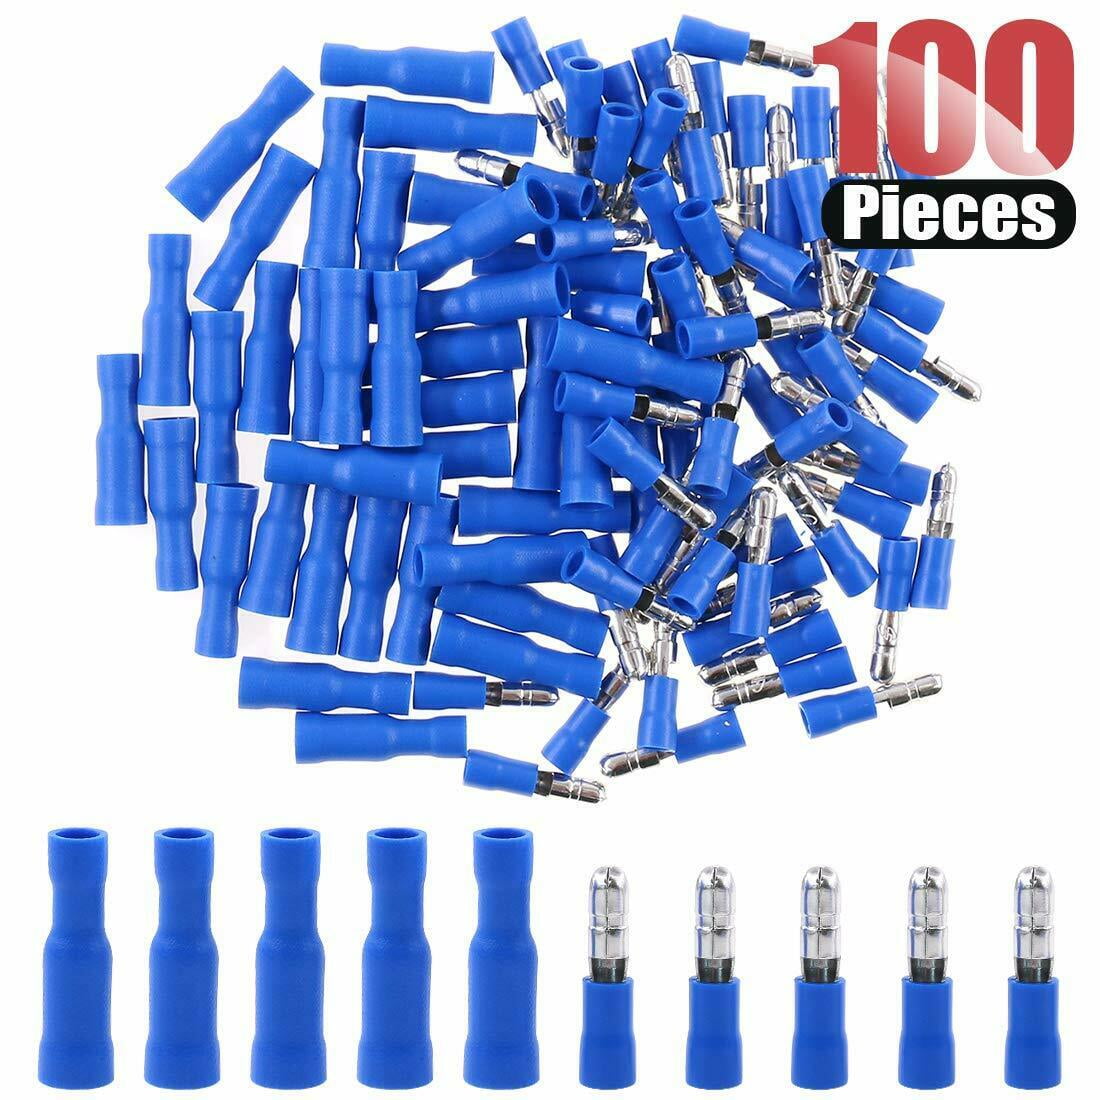 usa seller 100pcs BLUE 16-14 AWG BUTT CRIMP CONNECTORS ELECTRICAL WIRE TERMINALS 